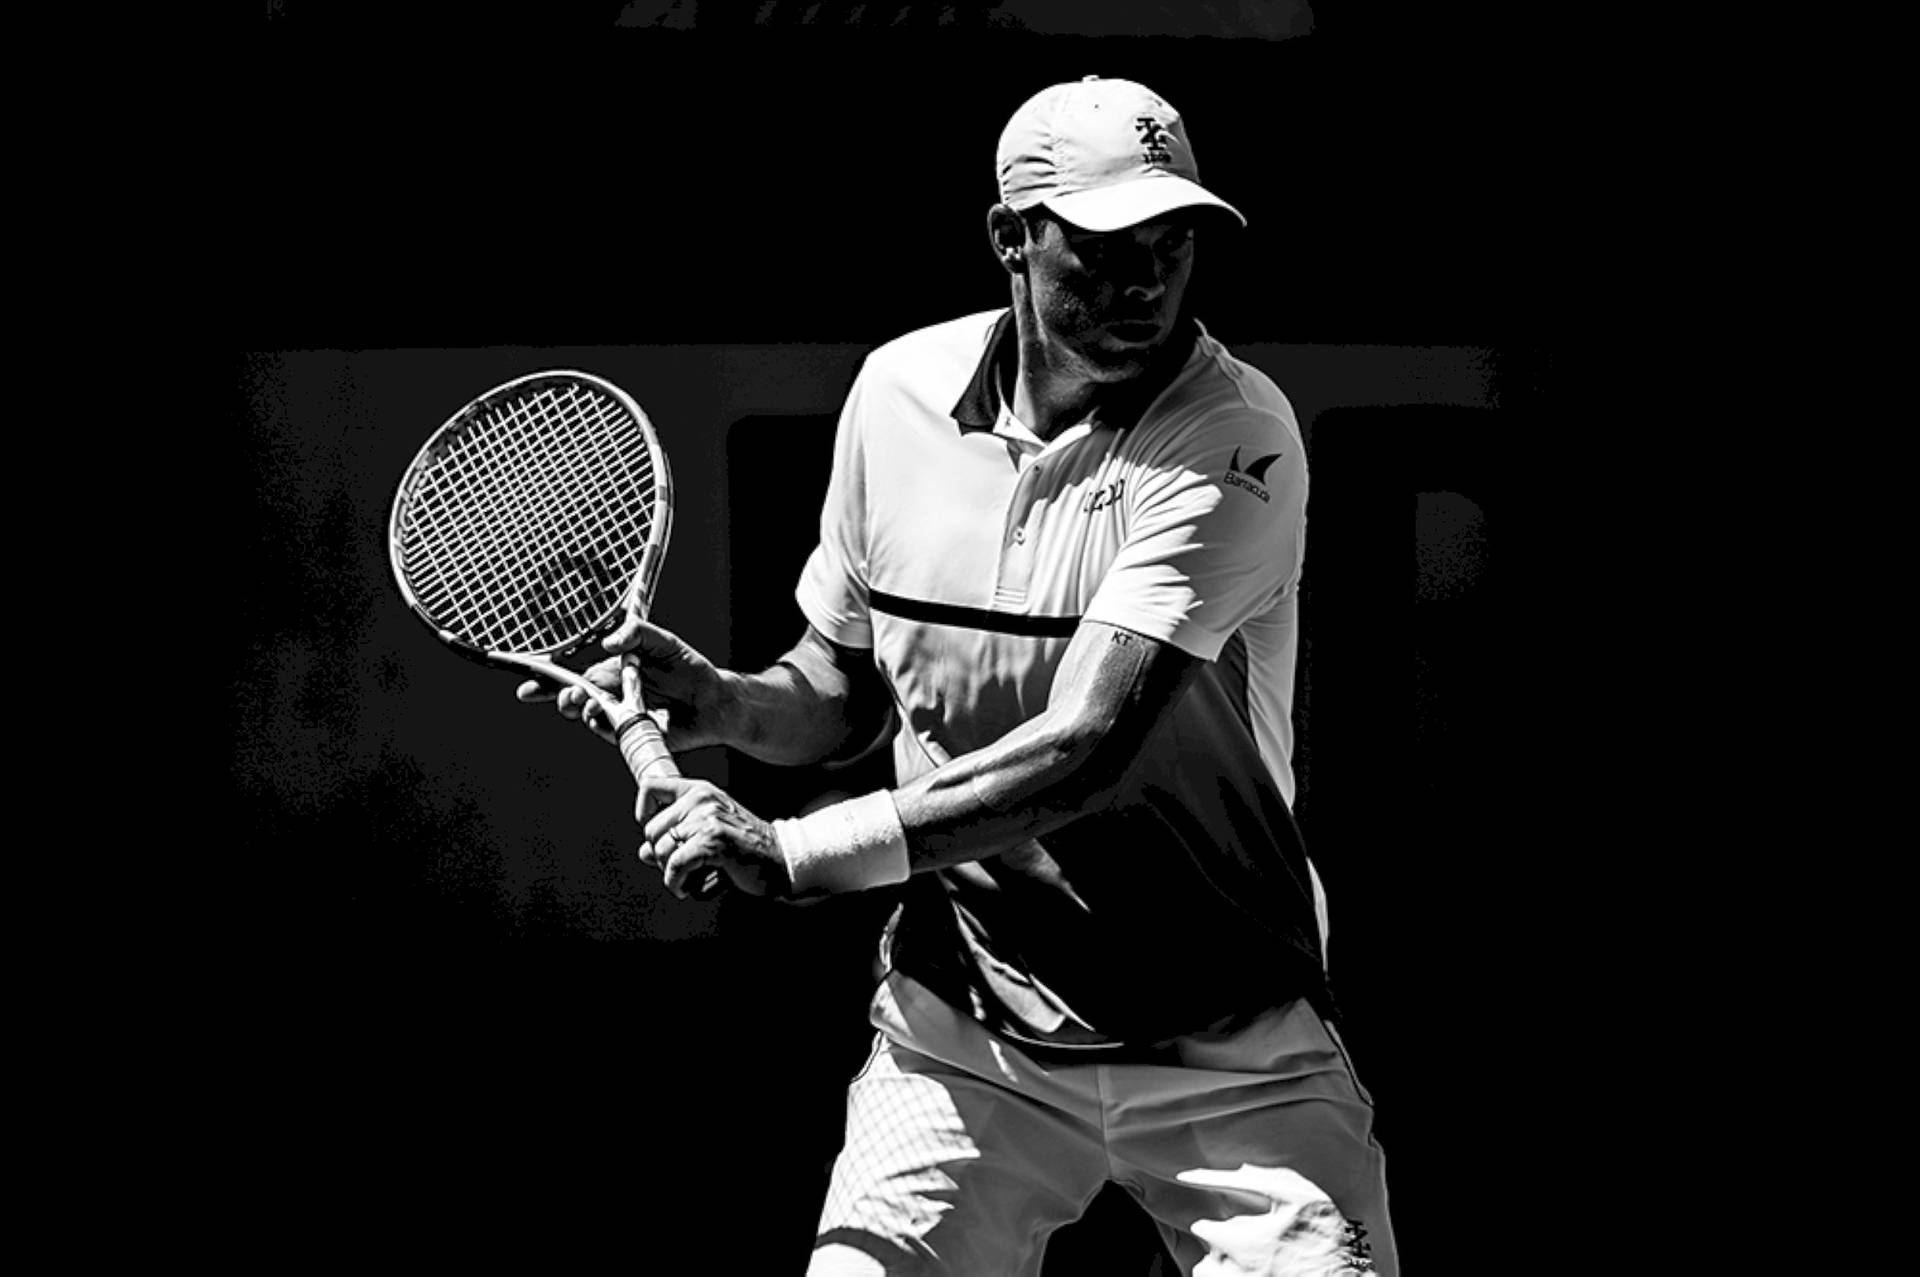 Svartoch Vit Bob Bryan. (this Would Be The Name Of The Wallpaper Featuring Bob Bryan In Black And White.) Wallpaper